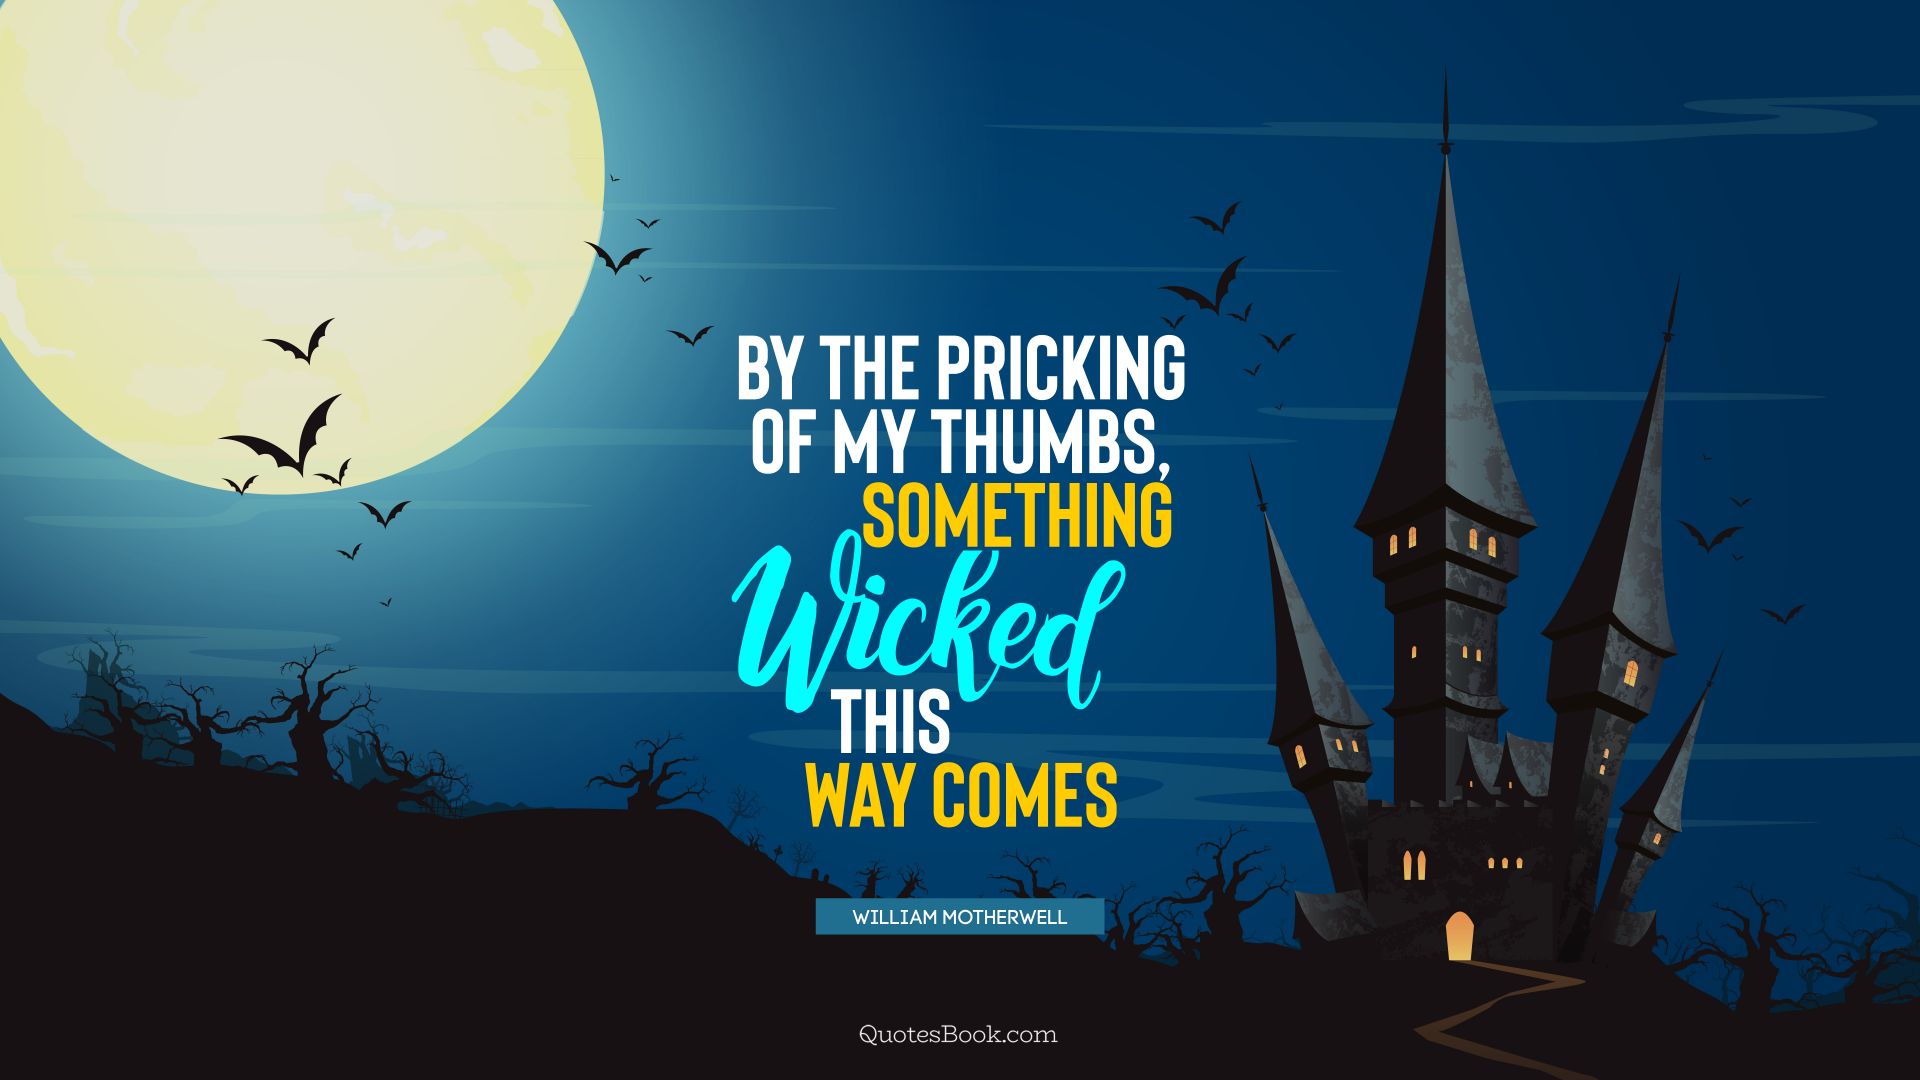 By the pricking of my thumbs, something wicked this way comes. - Quote by William Motherwell